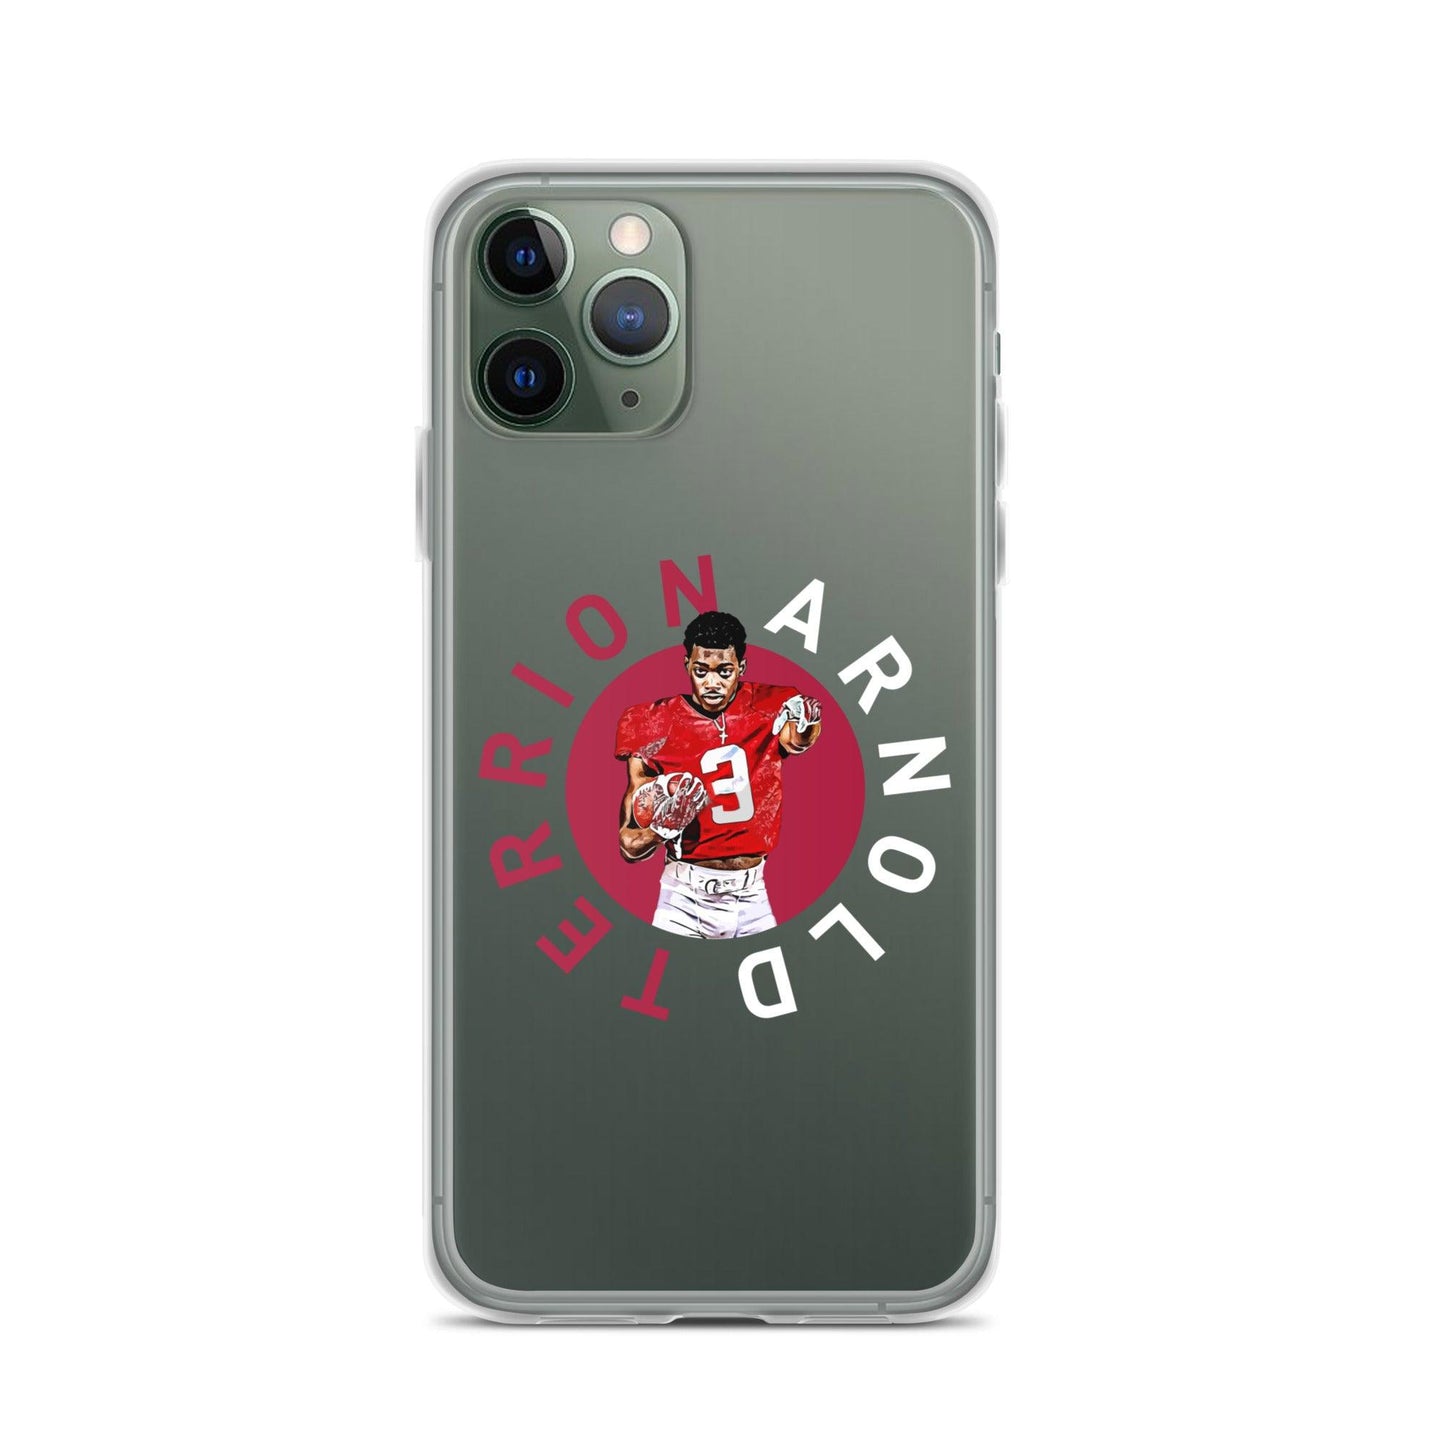 Terrion Arnold "Gametime" iPhone Case - Fan Arch